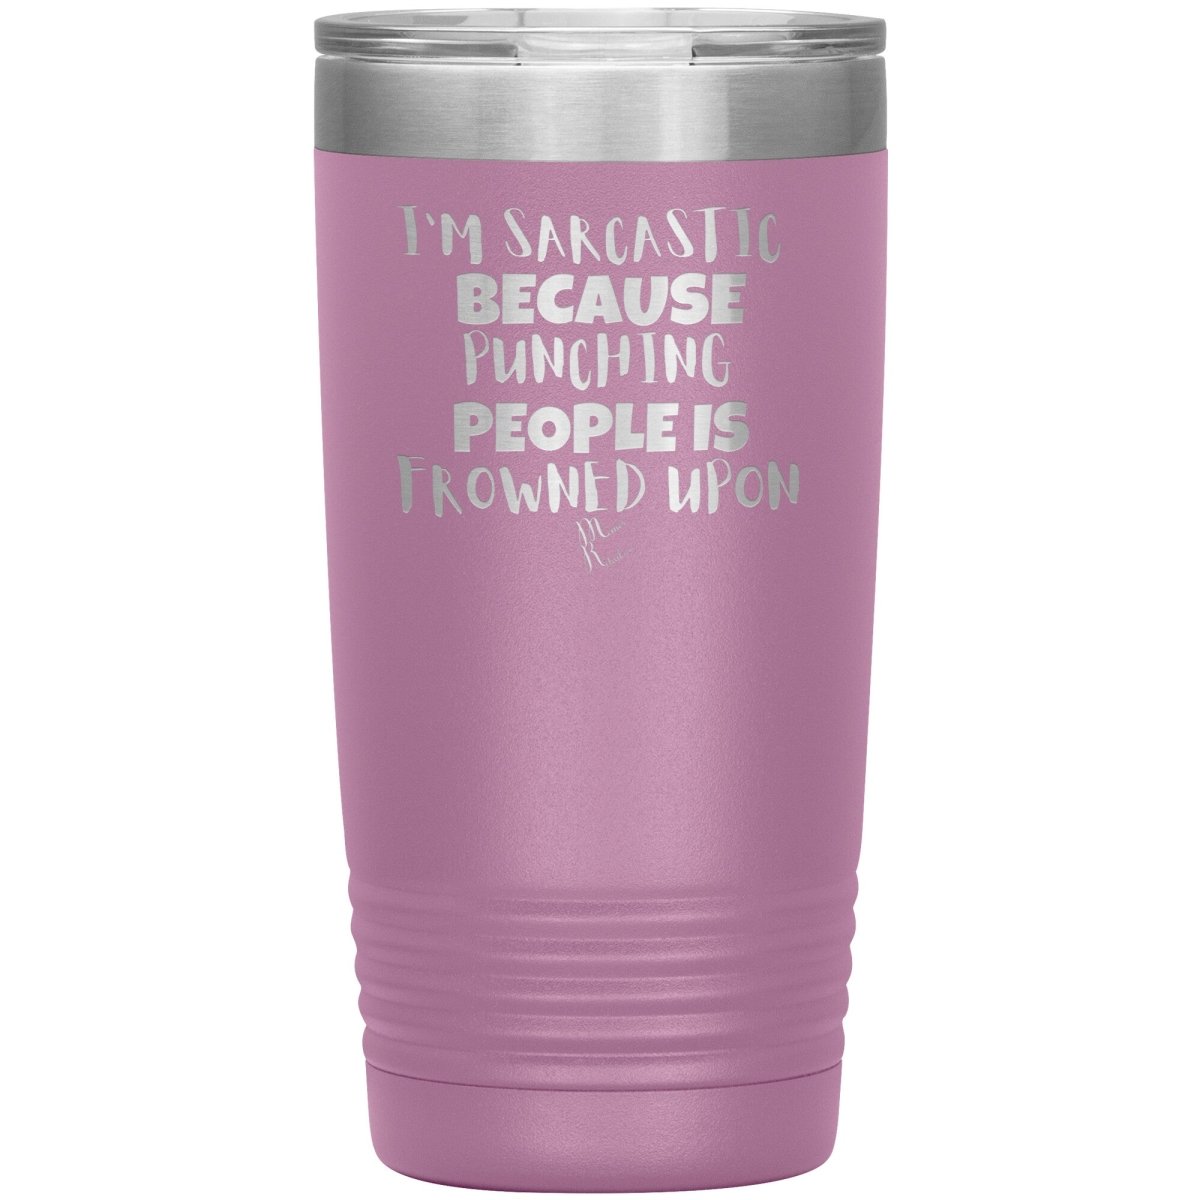 I'm Sarcastic Because Punching People is Frowned Upon Tumblers, 20oz Insulated Tumbler / Light Purple - MemesRetail.com